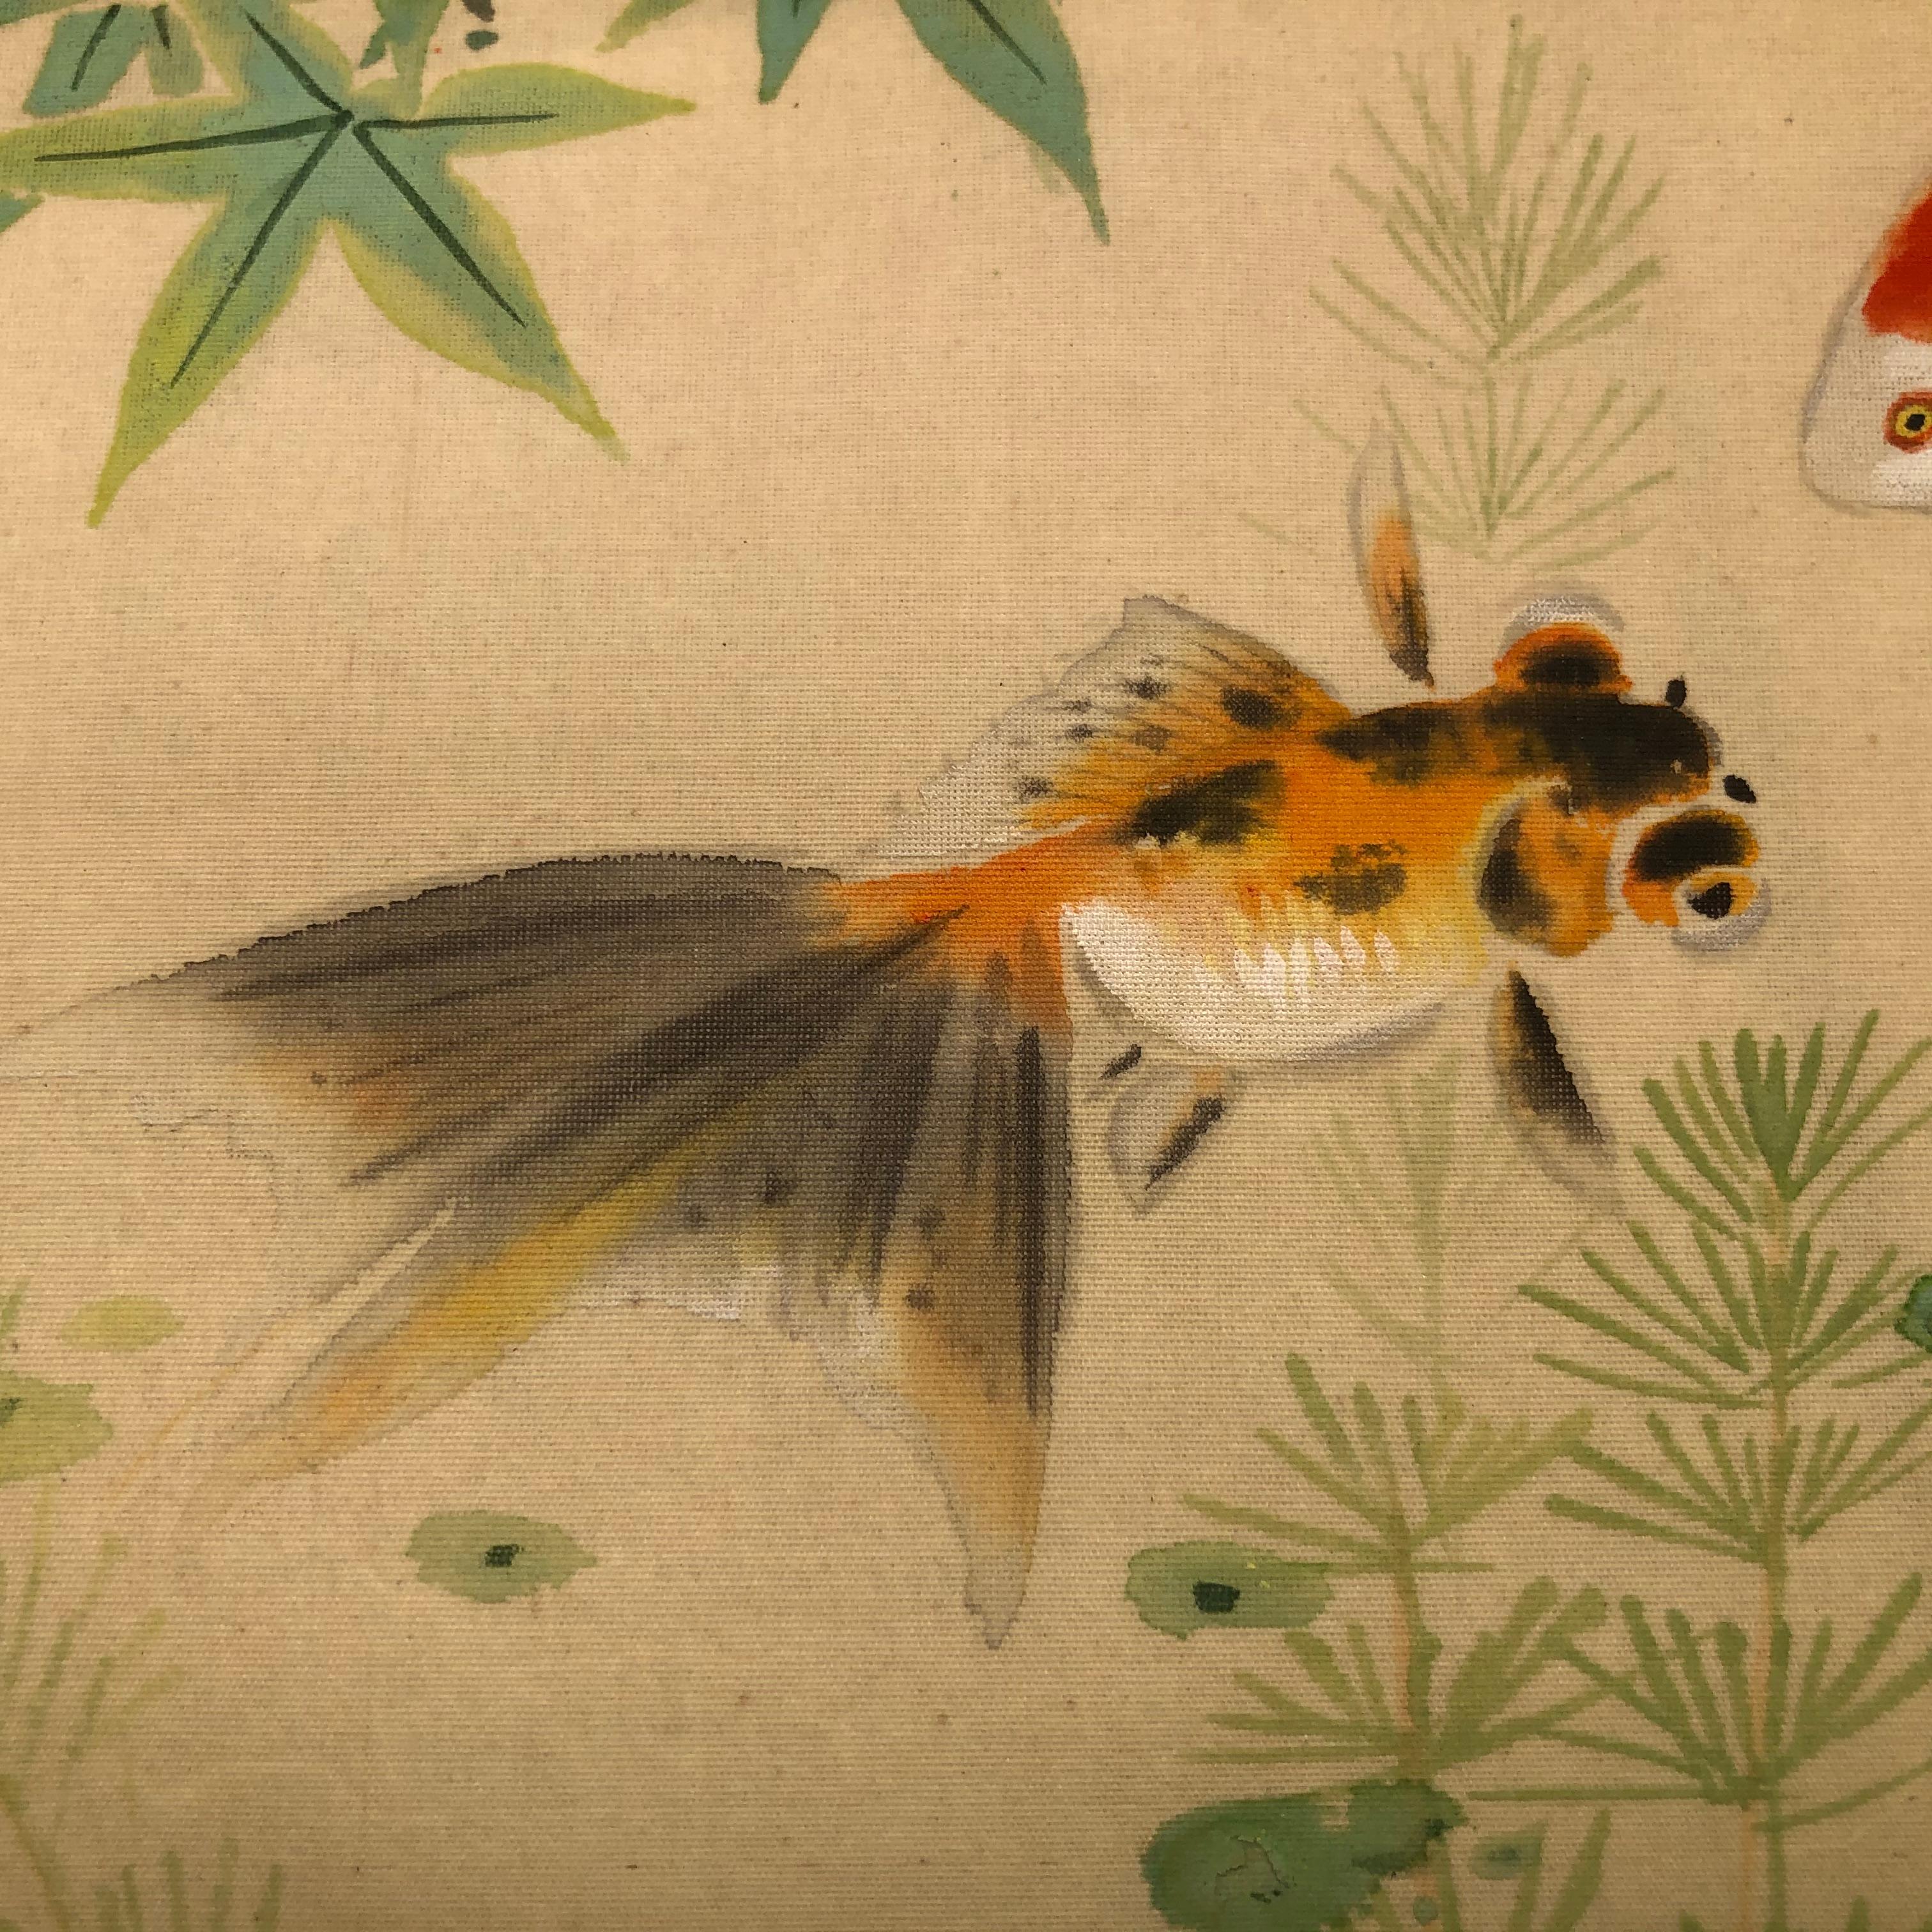 From our Recent Japanese Acquisition Travels

A beautiful and compelling Japanese antique hand painted painting of THREE GOLD FISH - ready to mount in your favorite frame and proudly display or give as a unique gift. .

Hand painting on silk in